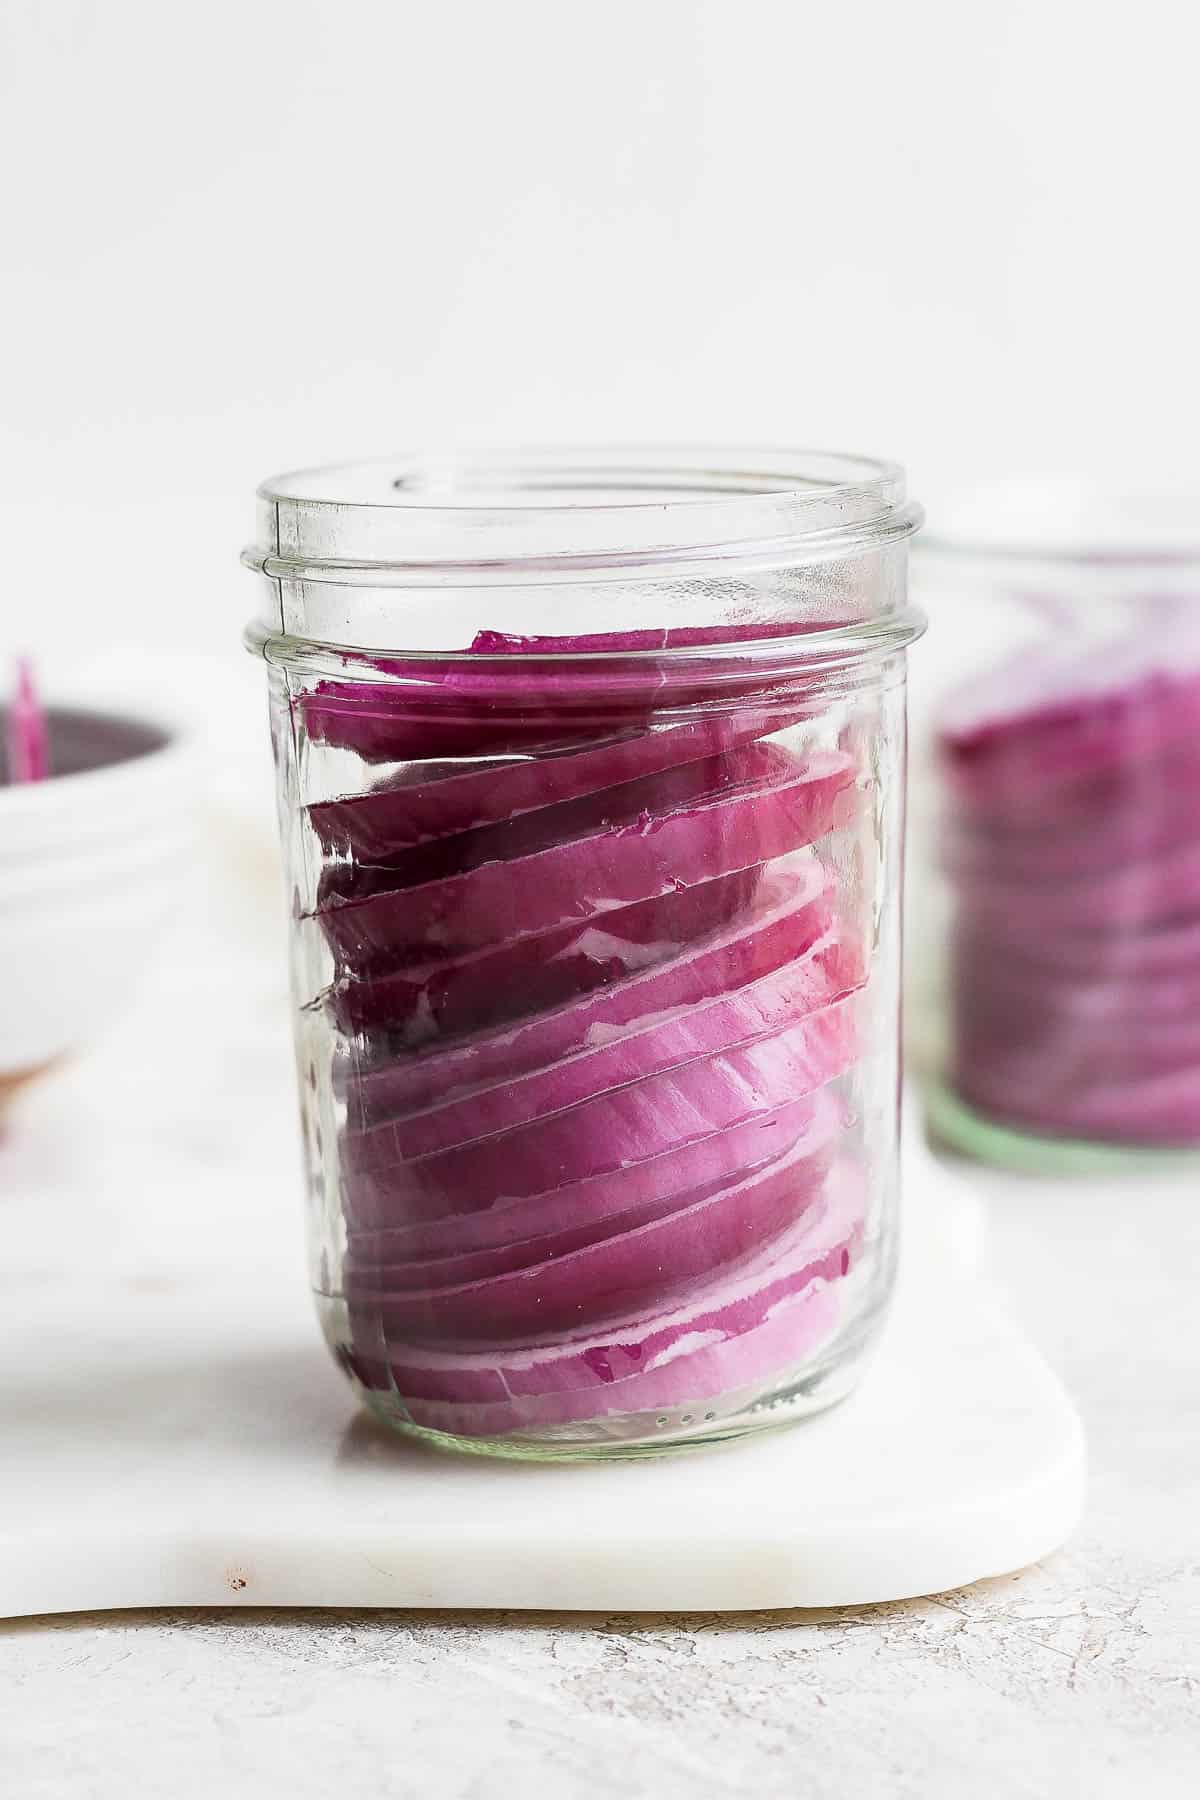 Slices of red onion in a jar.